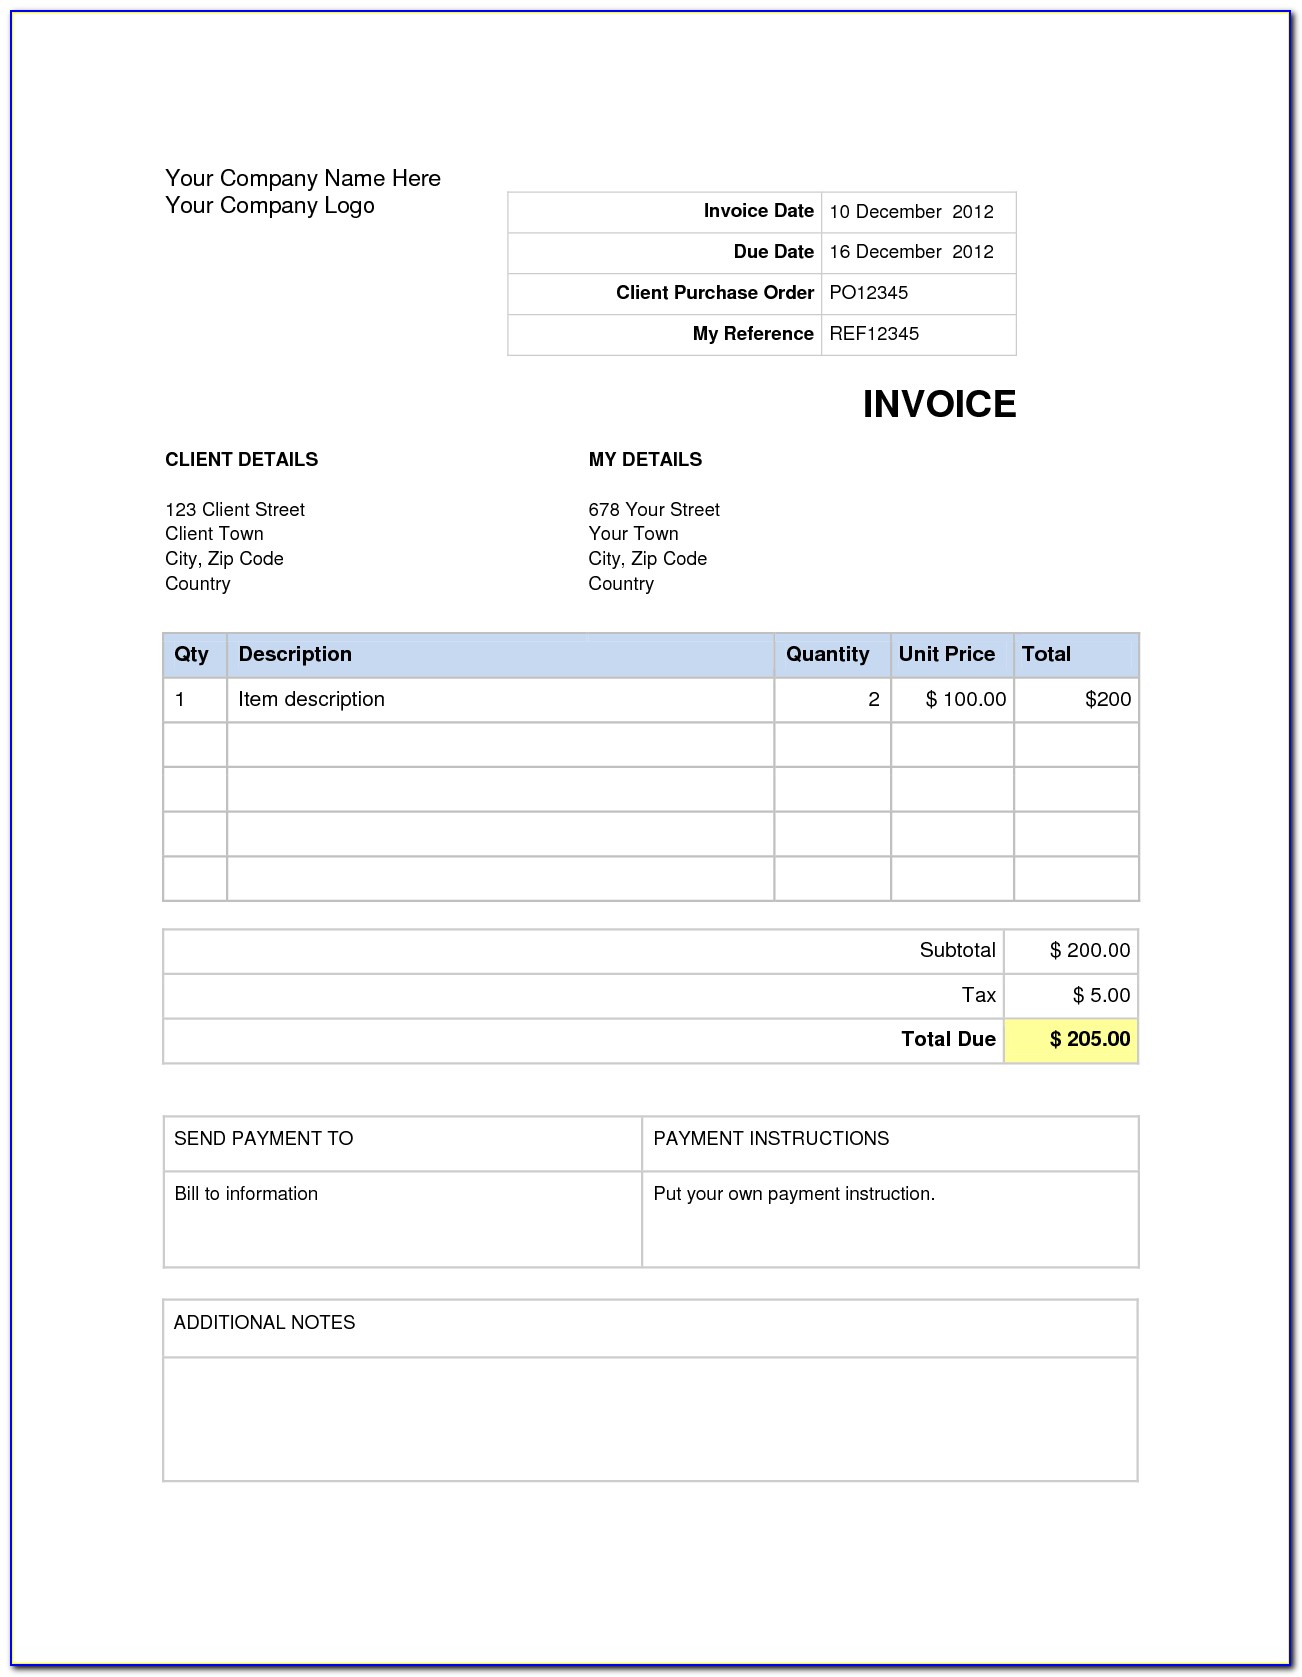 Microsoft Office Word Templates For Invoice